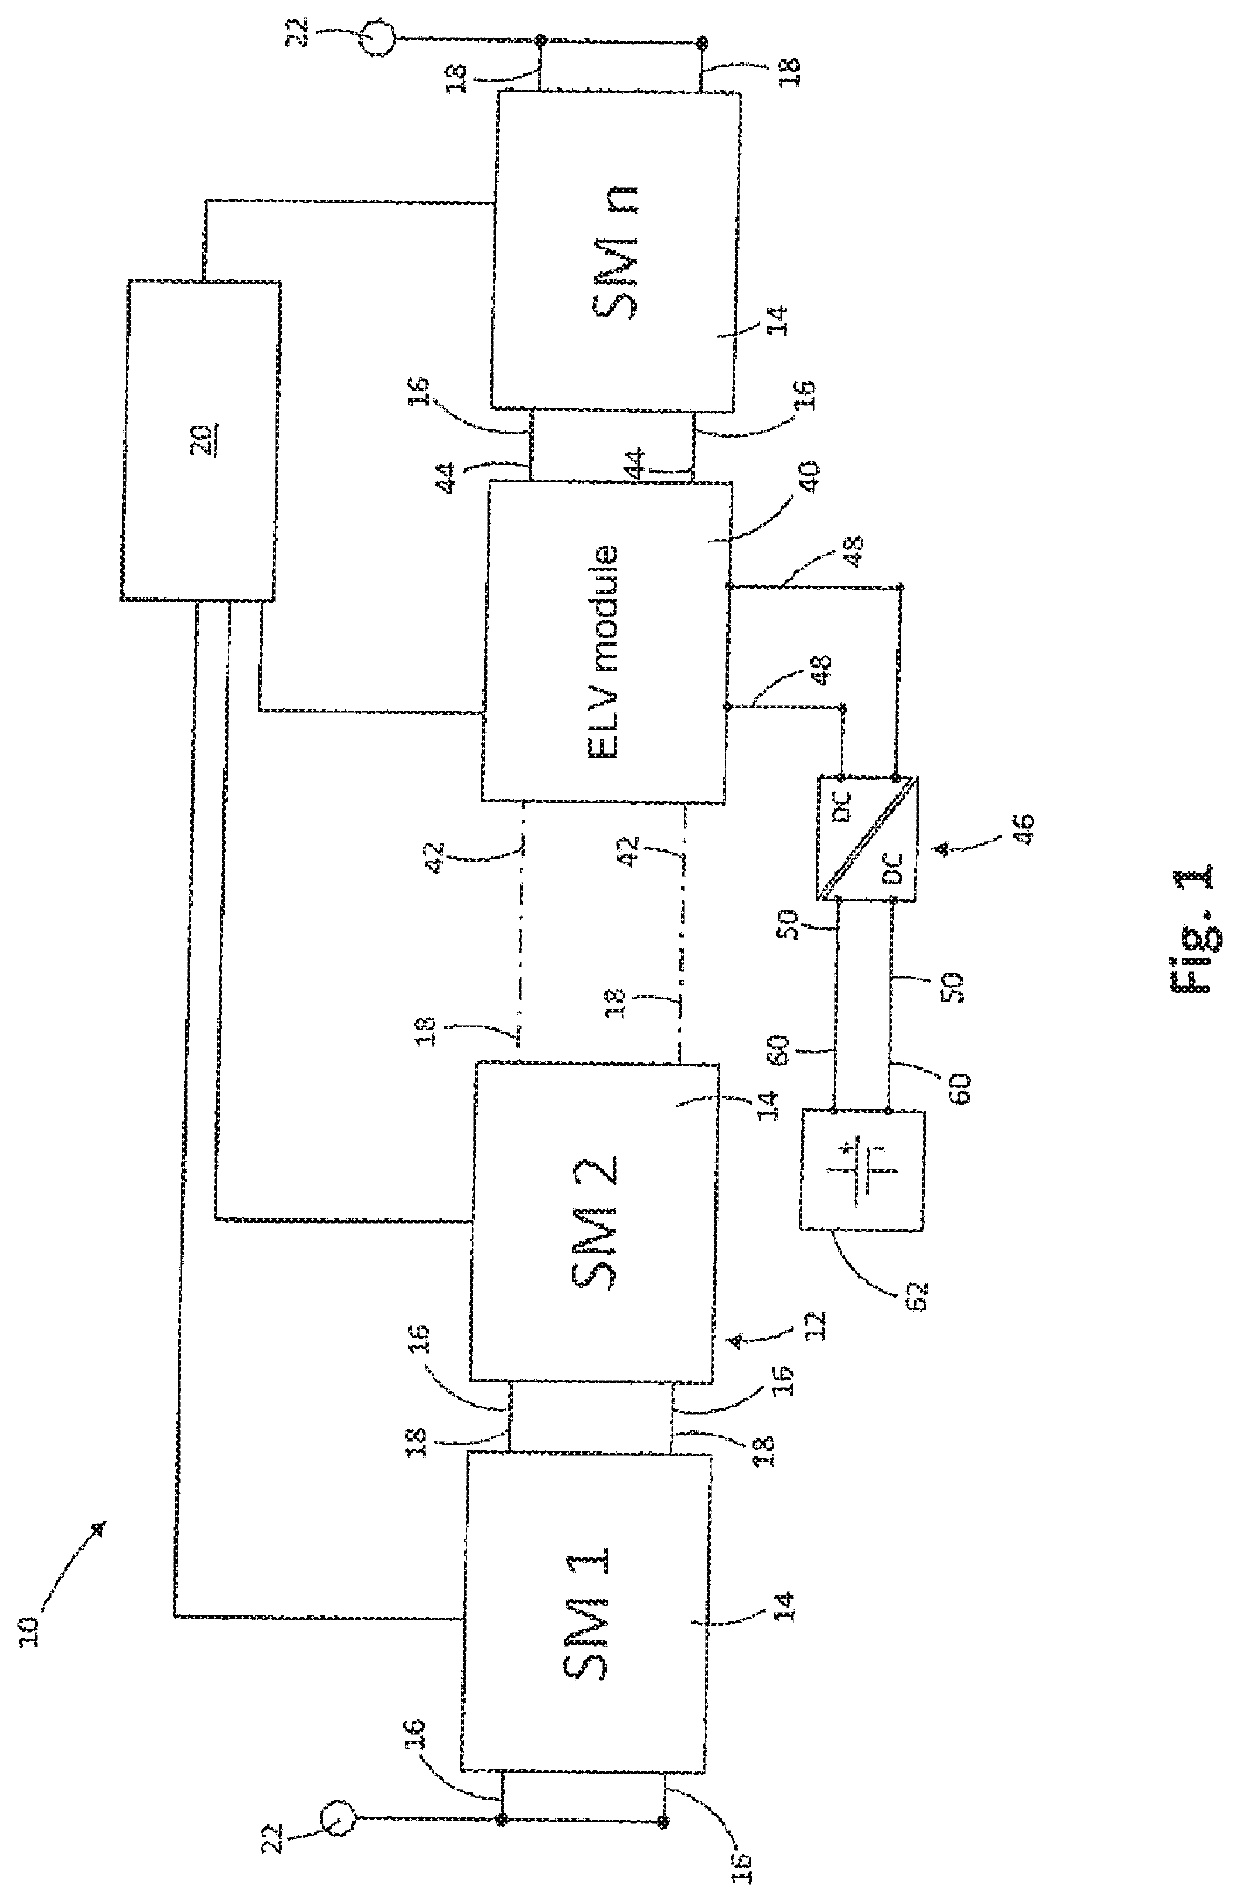 Low-volt decoupling from a modular energy store converter system